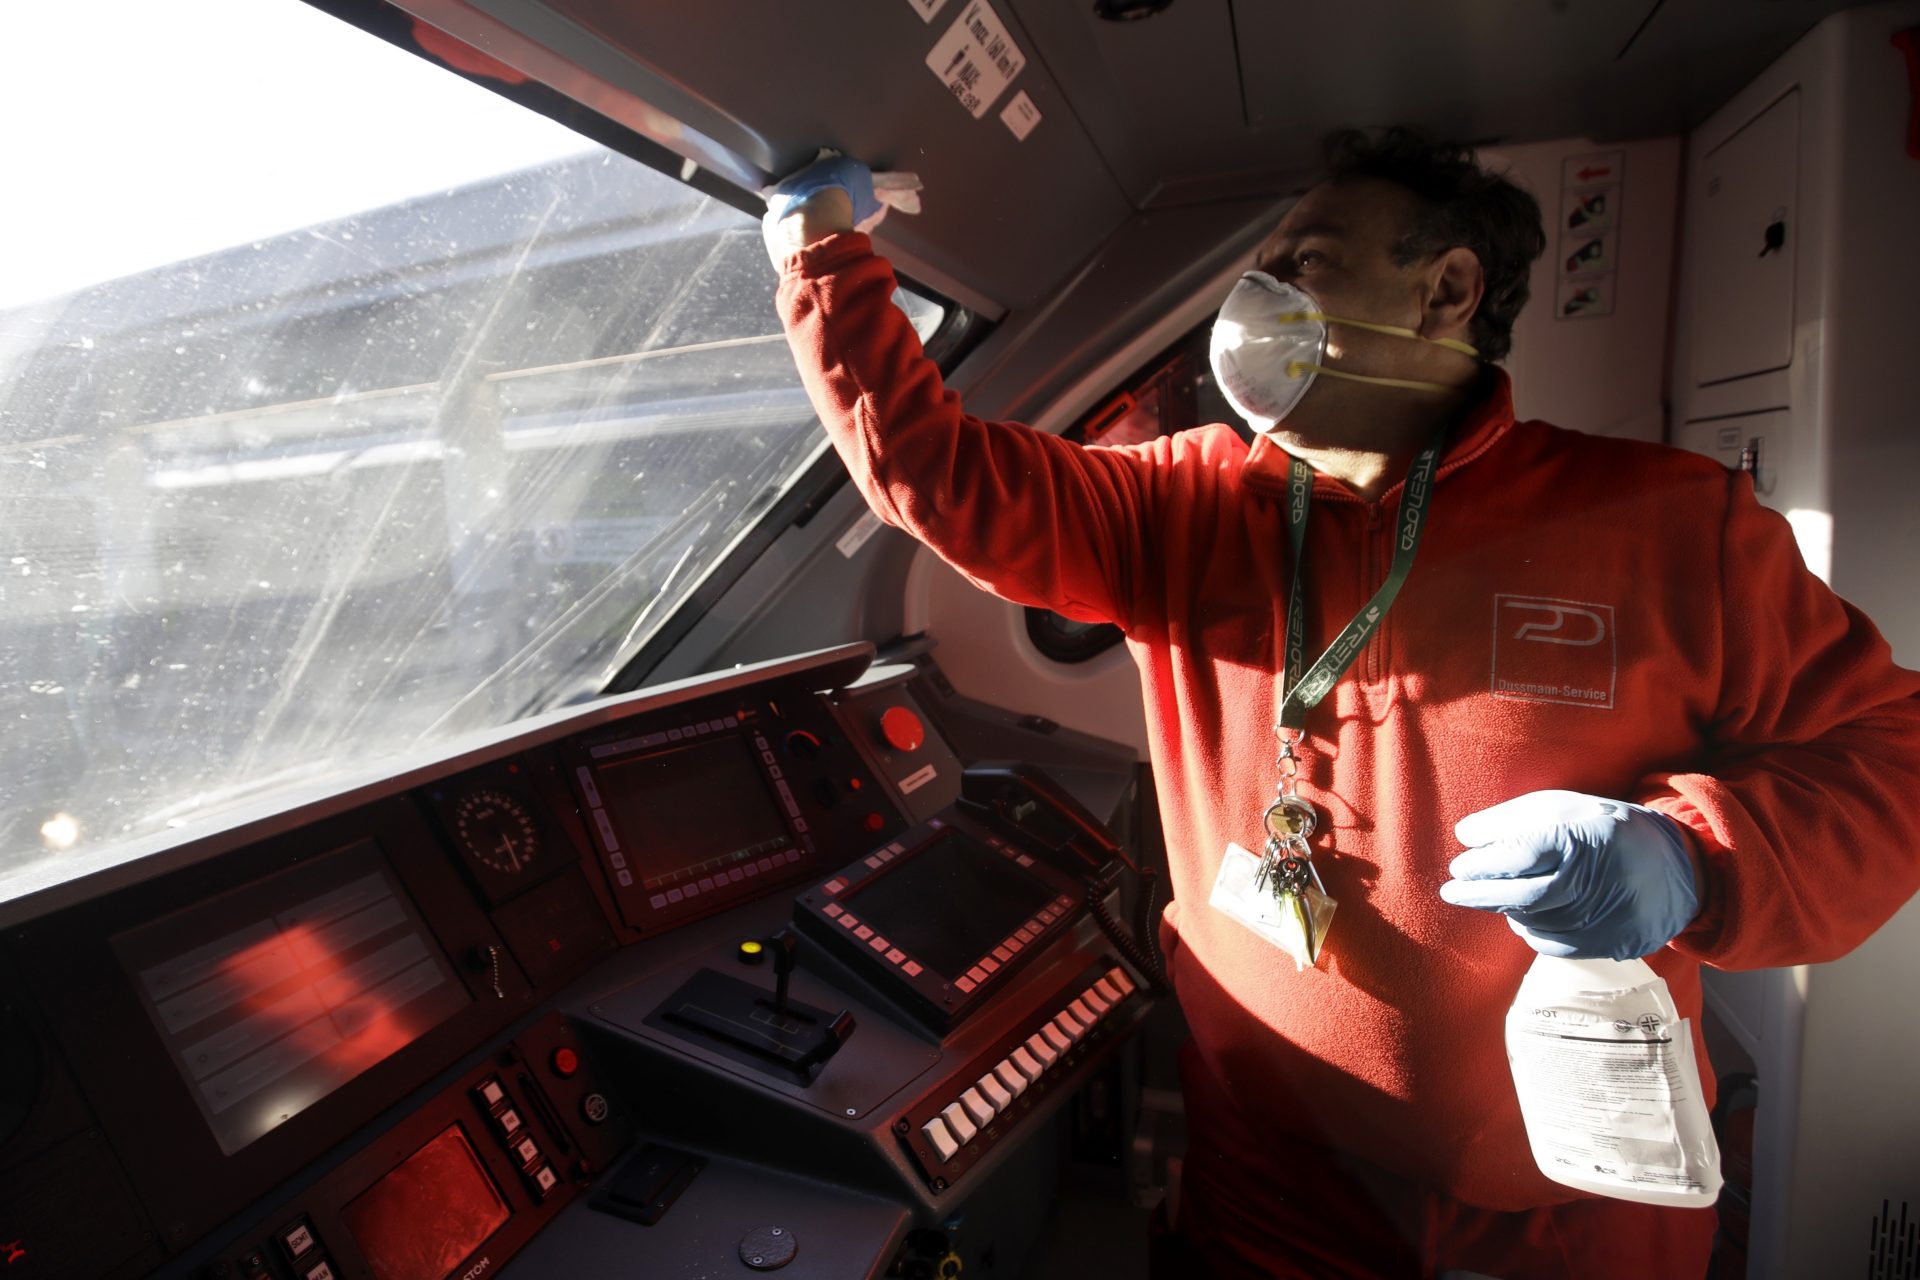 A cleaner sanitizes the cockpit of a regional train, at the Garibaldi train station in Milan, Italy, Friday, Feb. 28, 2020. Authorities are taking new measures to sanitize trains and public transportation after the COVID-19 virus outbreak.